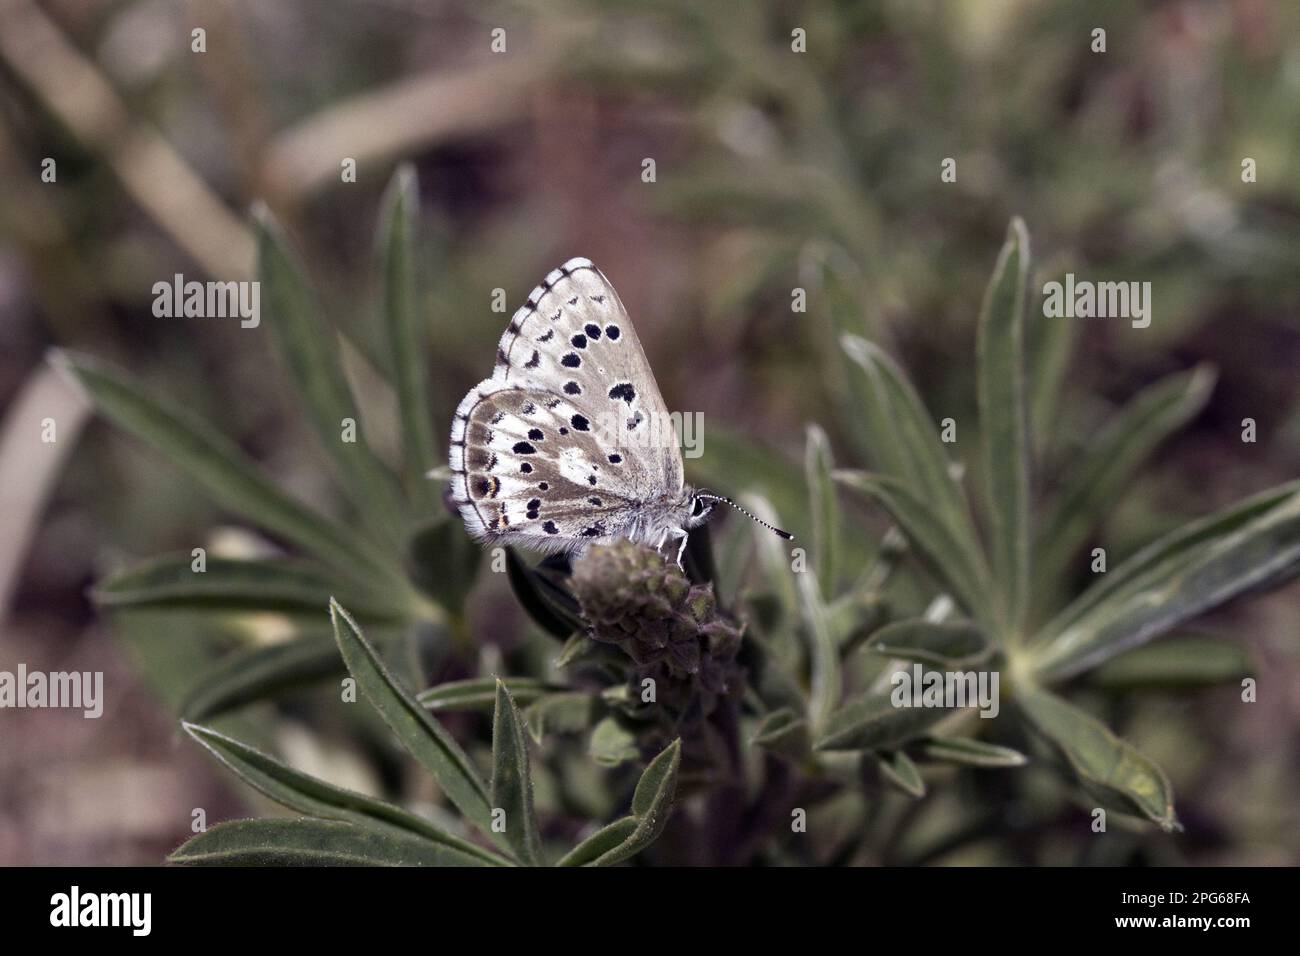 Gossamer winged butterfly (Lycaenidae), Other animals, Insects, Butterflies, Animals, Arrowhead blue butterflies, Glaucopsyche piasus Stock Photo